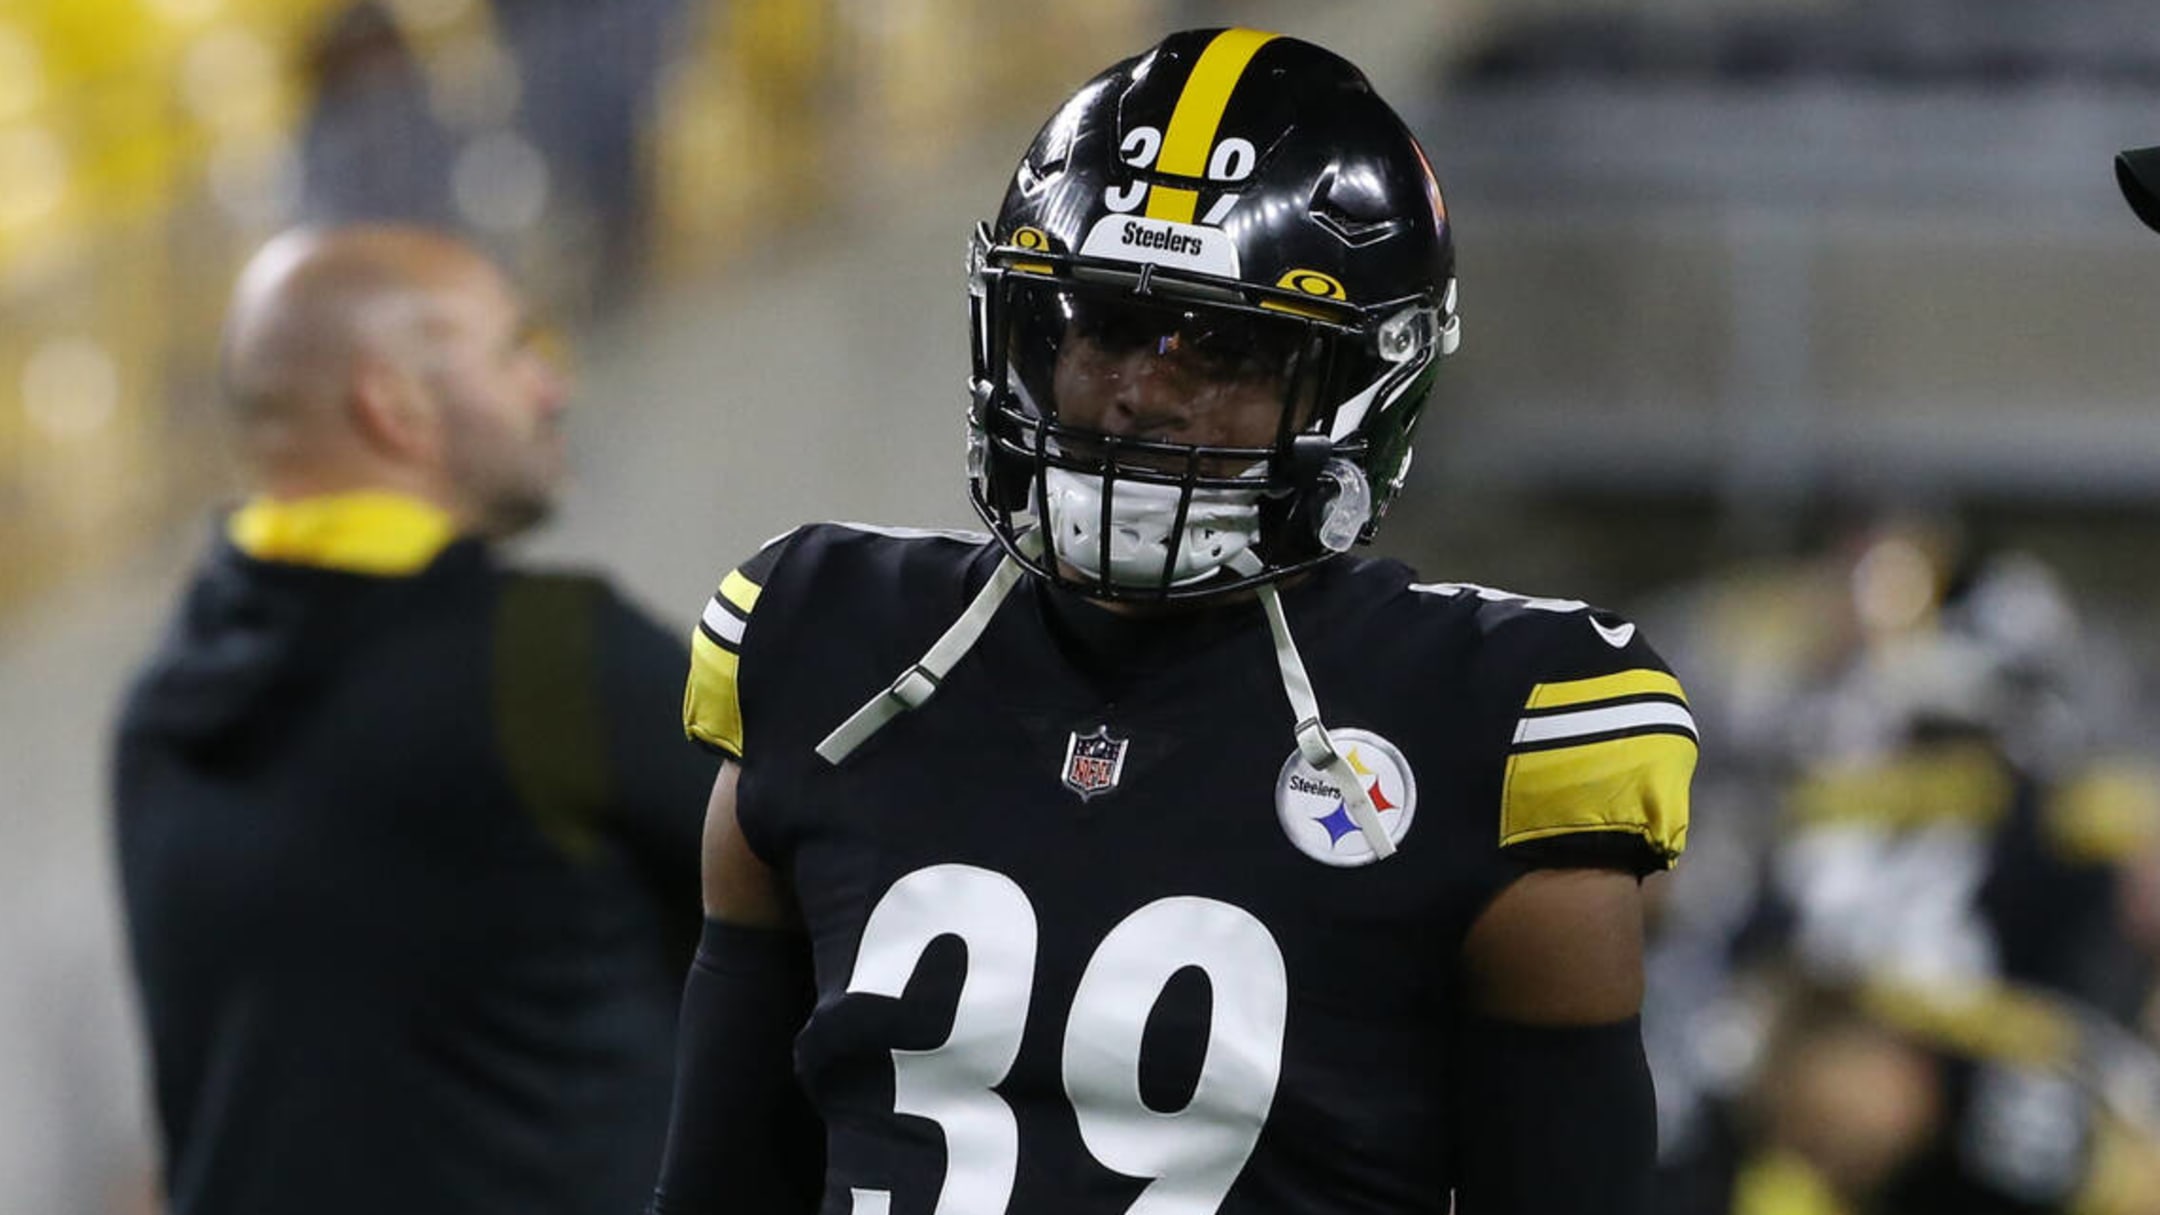 Steelers Minkah Fitzpatrick is transitioning into an All-Pro safety